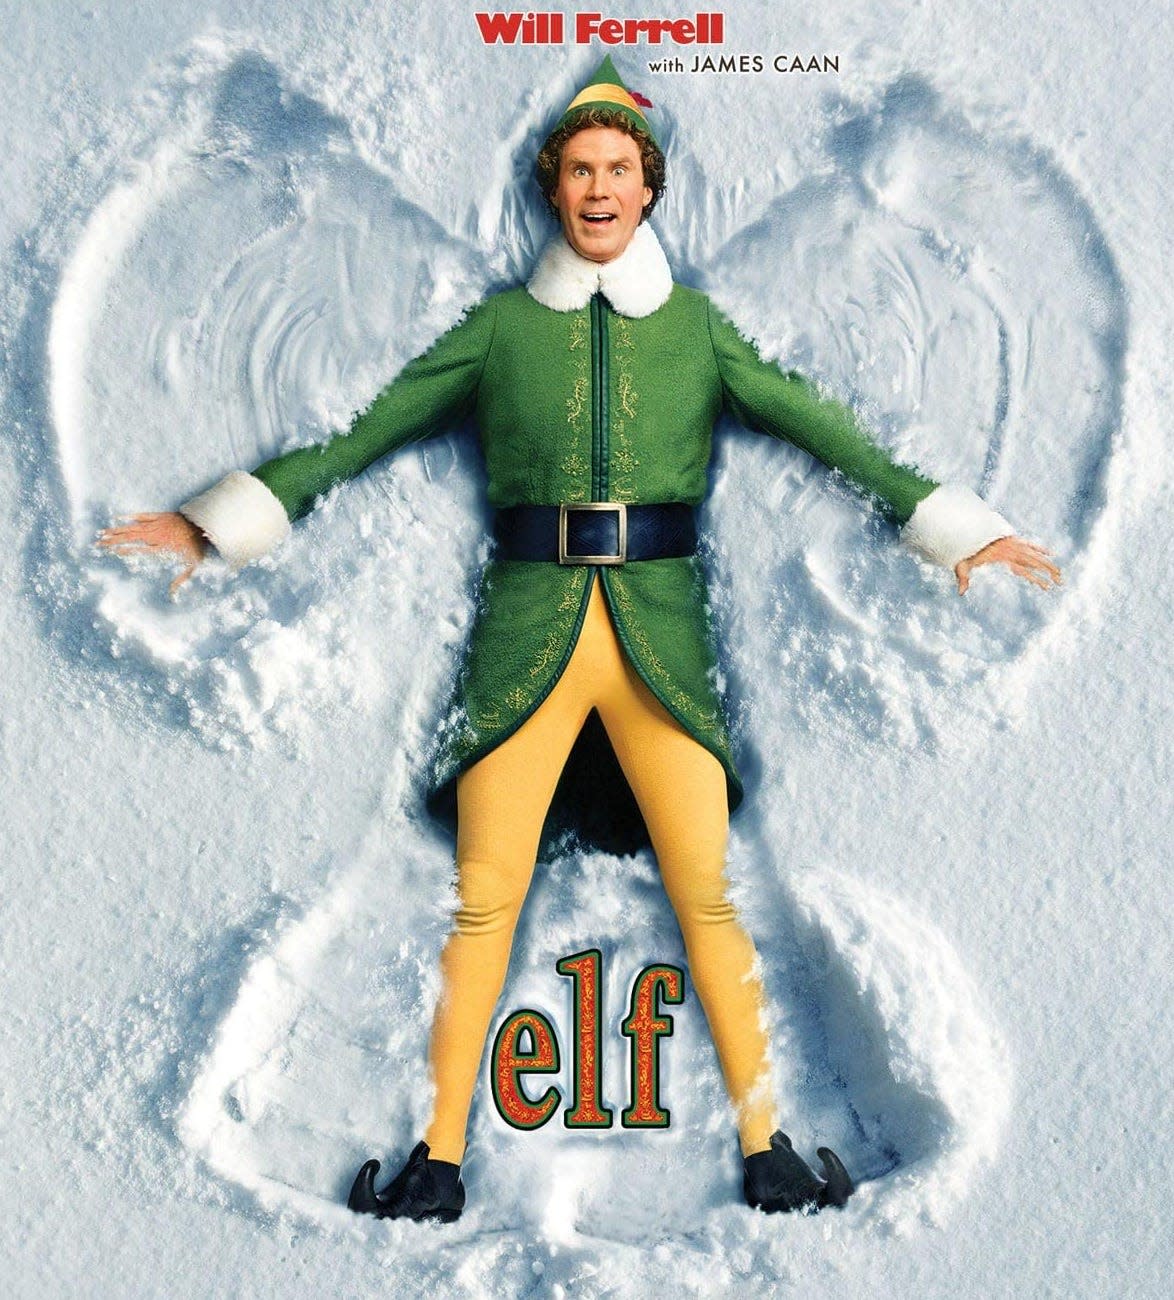 The Plaza Classic Film Festival's holiday movies series will feature "Elf" at 1 p.m. and "National Lampoon's Christmas Vacation" at 3:30 p.m. Dec. 3 at the Plaza Theatre Kendle Kidd Performance Hall.